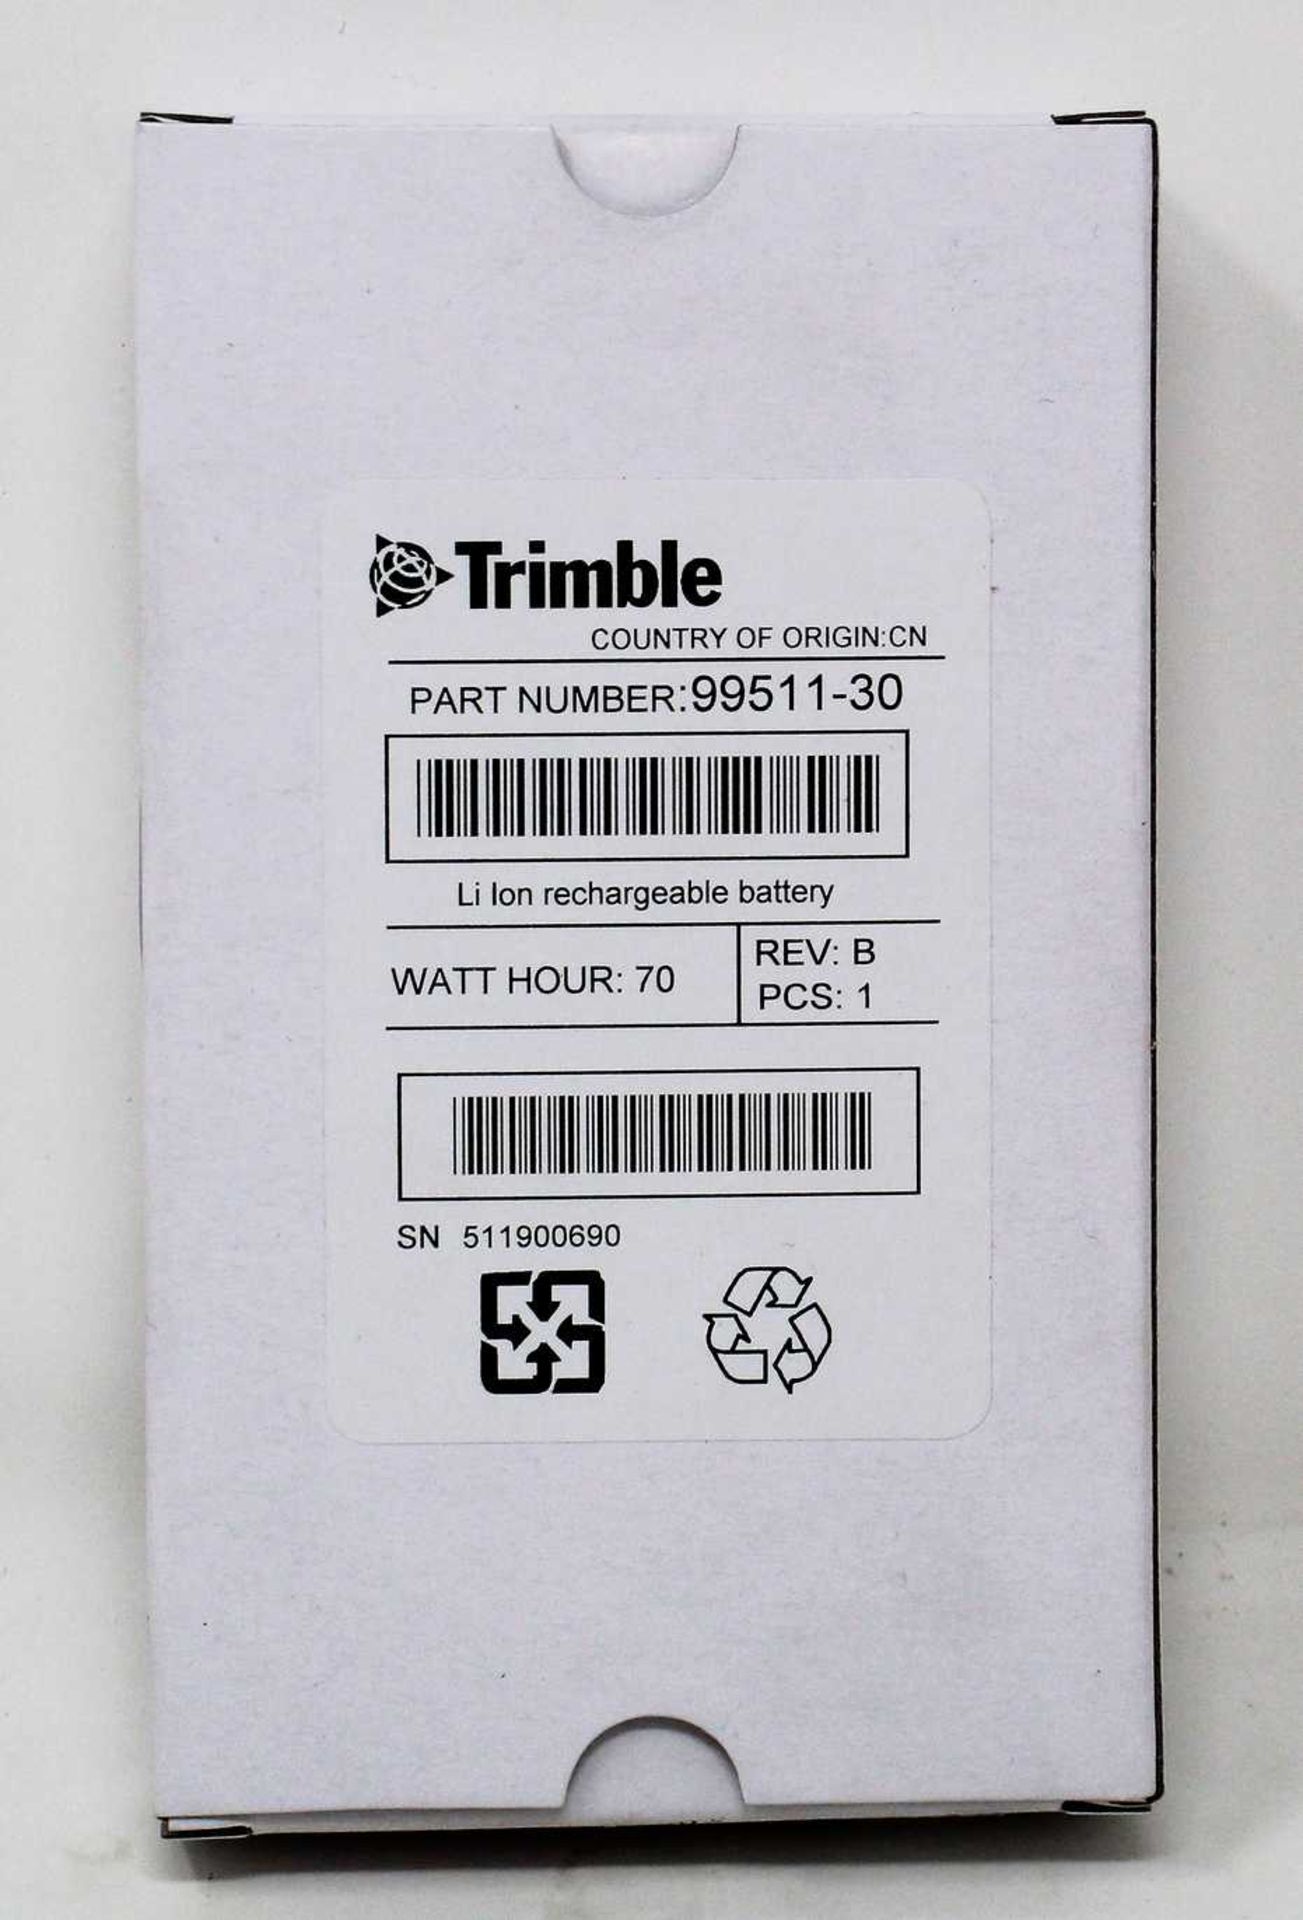 A boxed as new Trimble Rechargeable Li-Ion Battery For Robotic Total Stations (P/N: 99511-30).